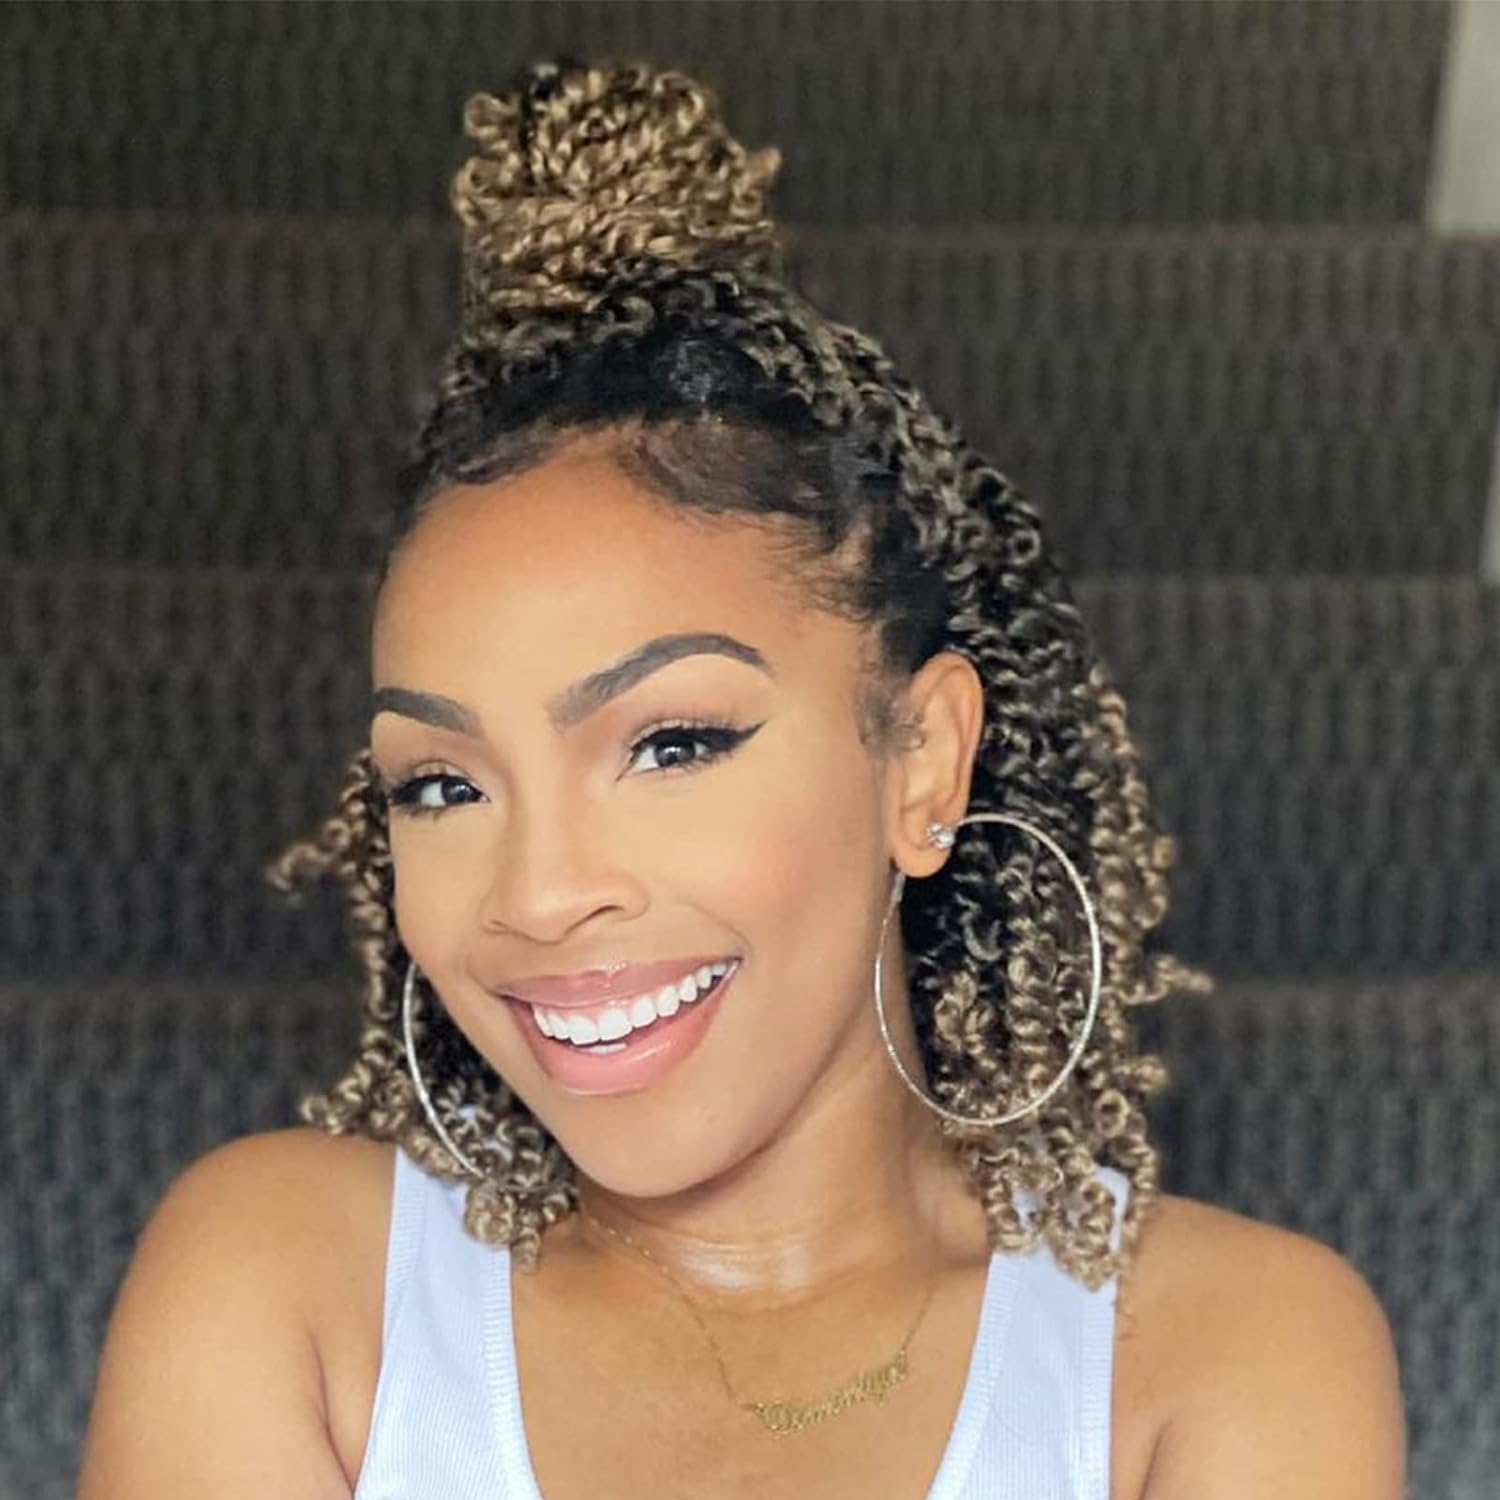 FAST SHIPPING 3-5 DAY NB | ToyoTress Tiana Passion Twist Hair - Pre-twisted Crochet Braids Natural Black, Pre-looped Synthetic Braiding Hair Extensions